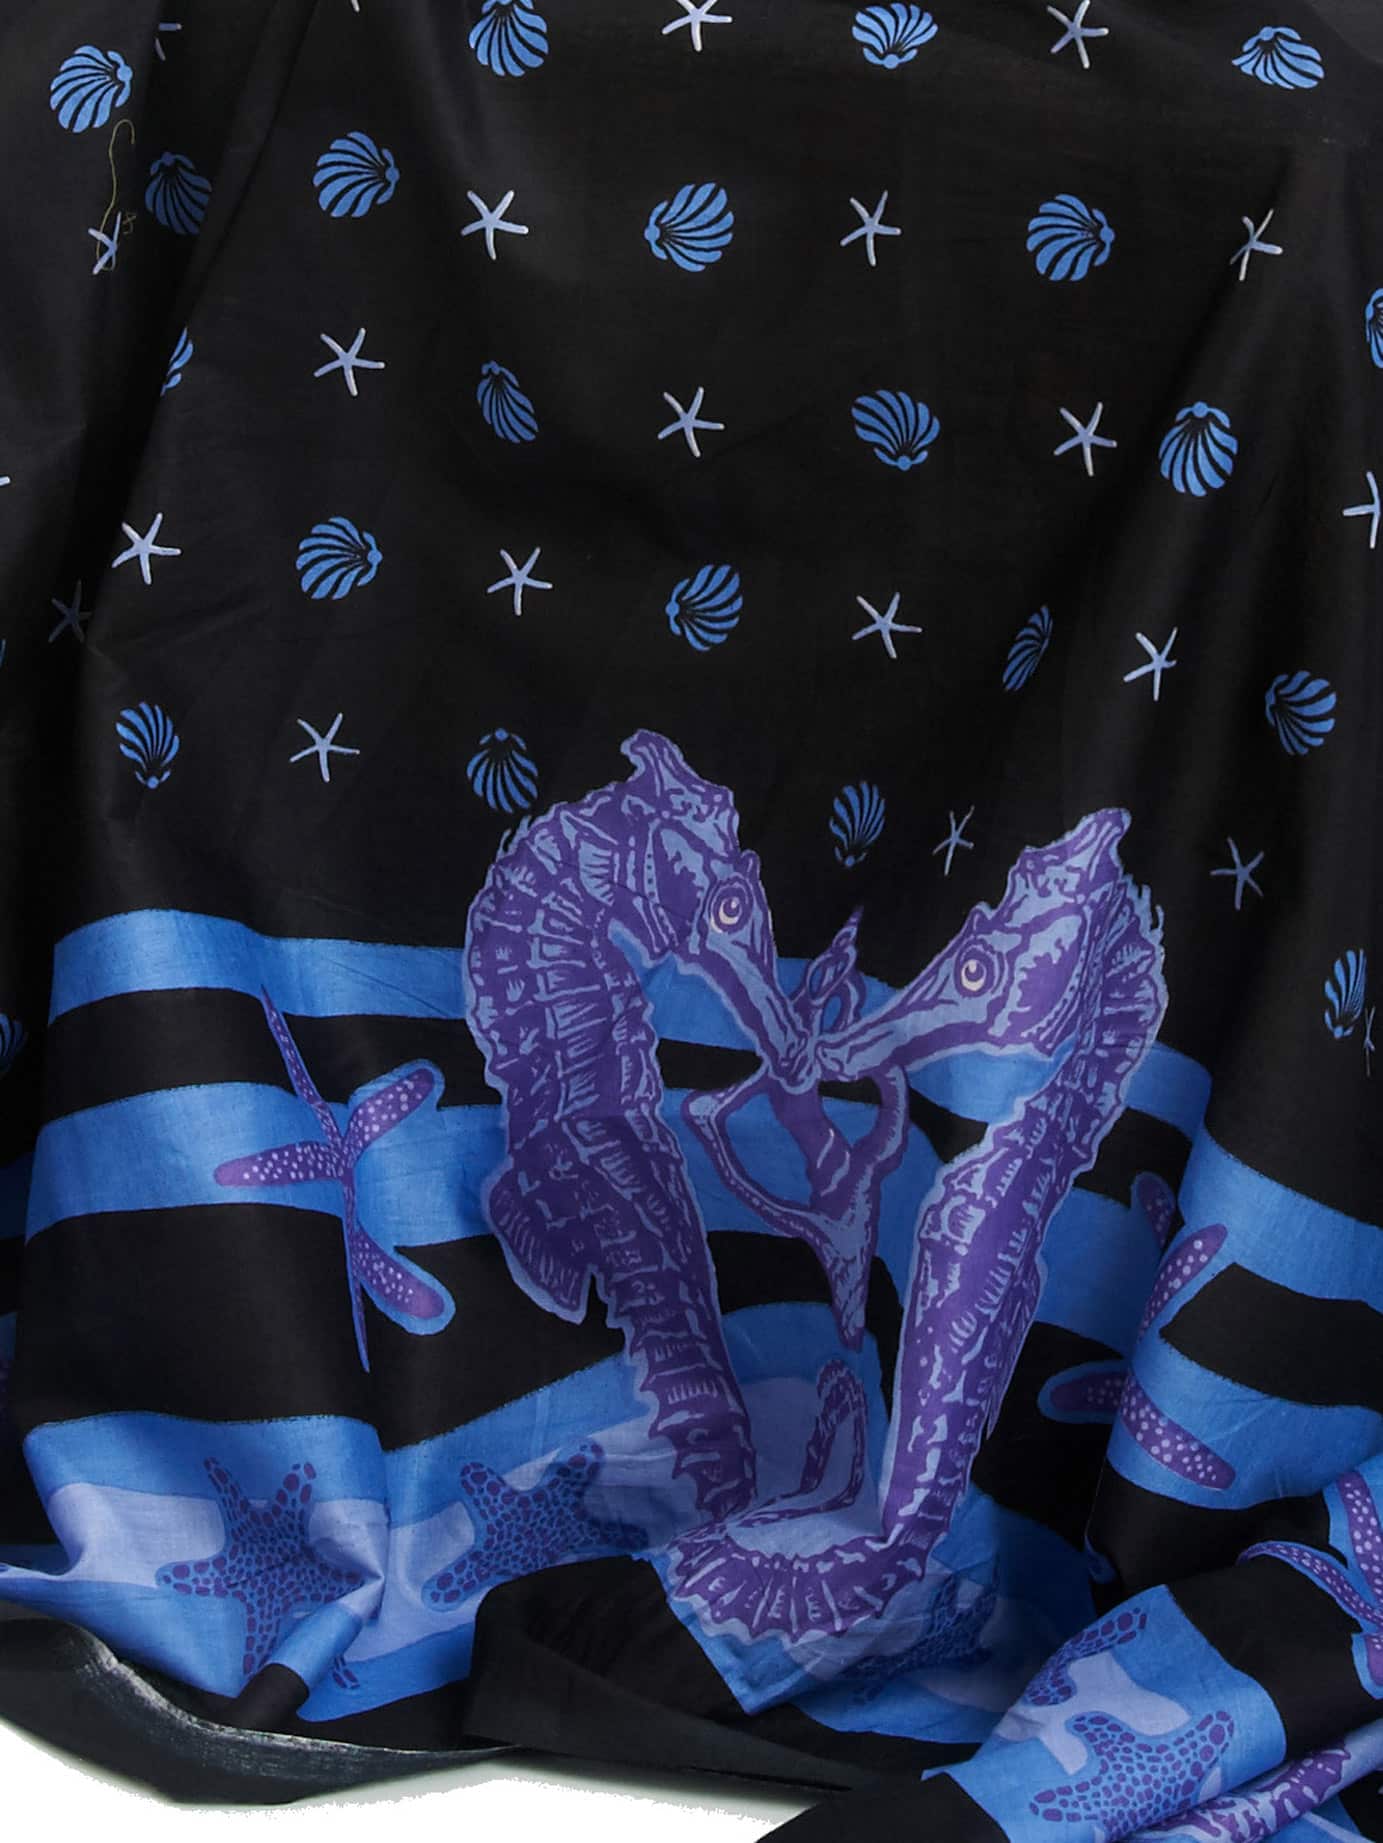 fine 100% cottonvoile form India printed with seahorses and shells on a black background